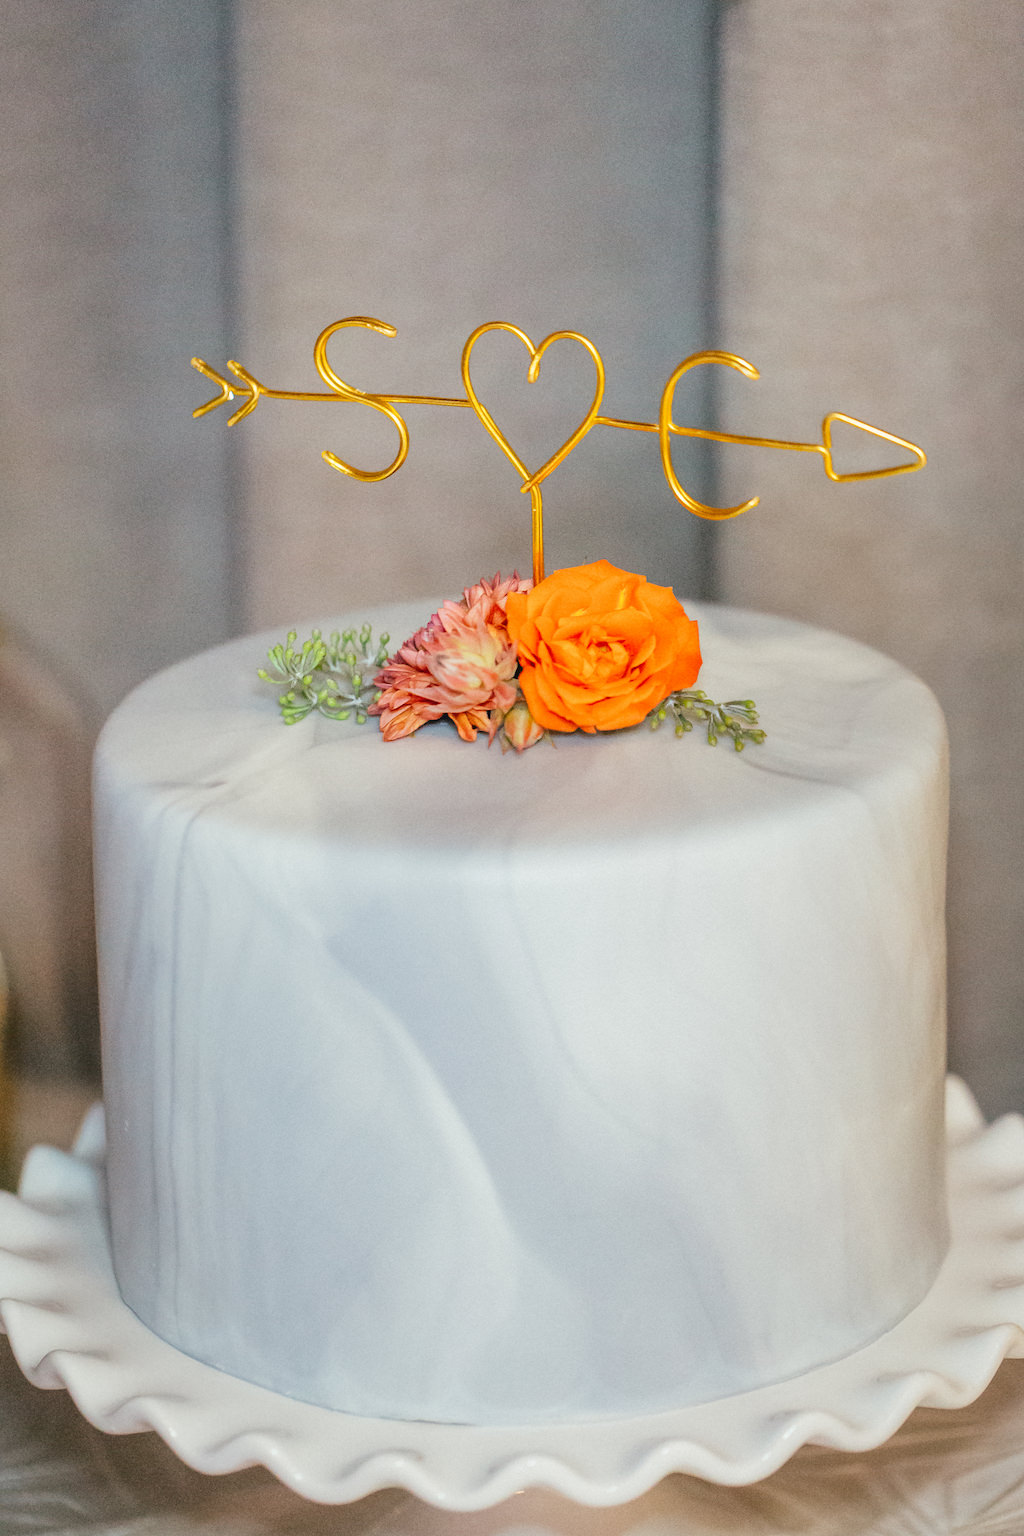 Single Tier Round Blue Marble Cake with Custom Initial and Arrow Heart Gold Wire Cake Topper and Orange Flowers on White Ceramic Cake Stand